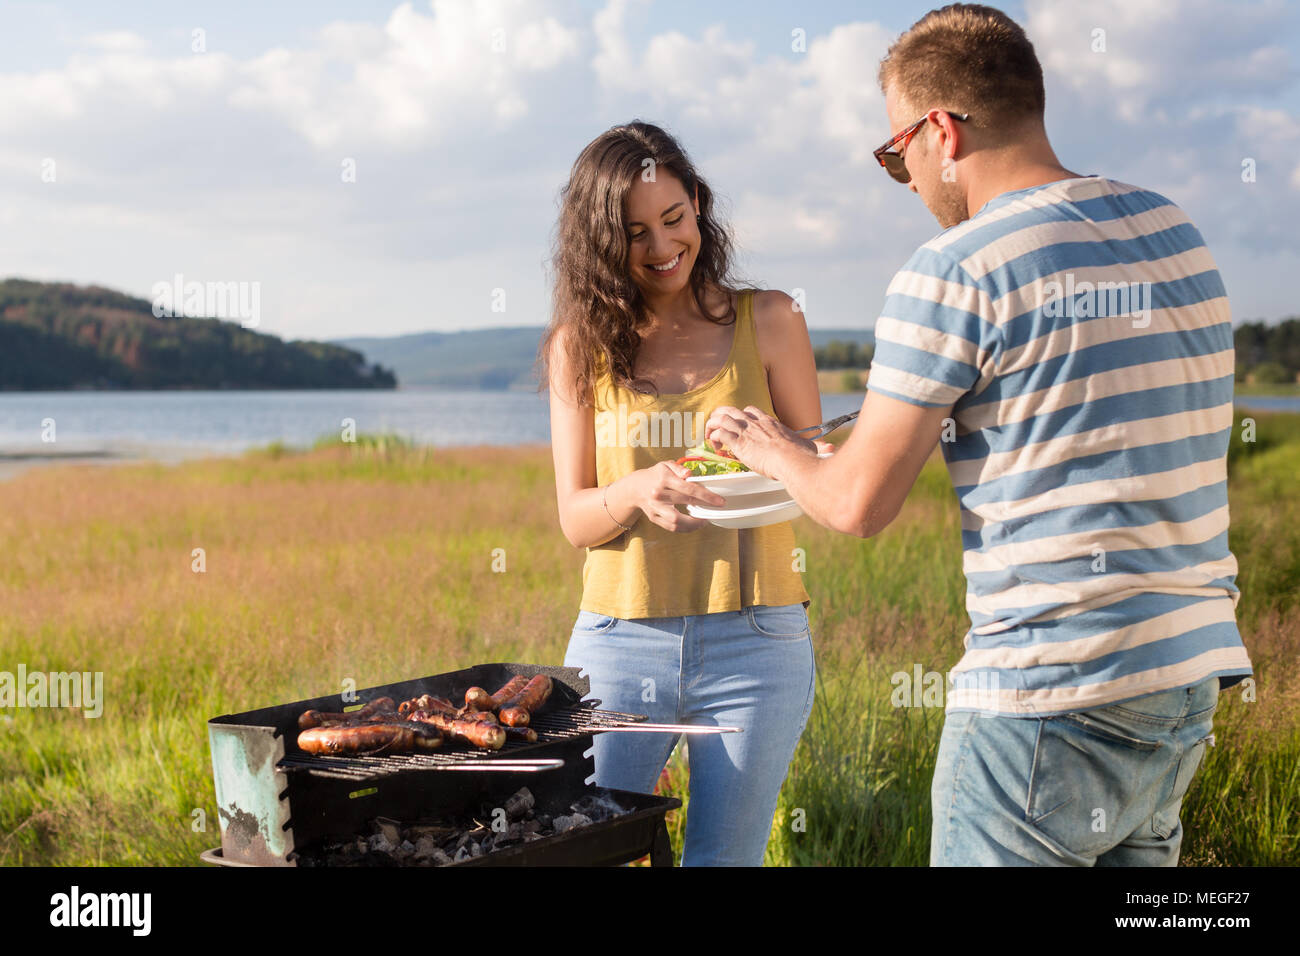 Man and woman having barbecue at lakeside in nature Stock Photo